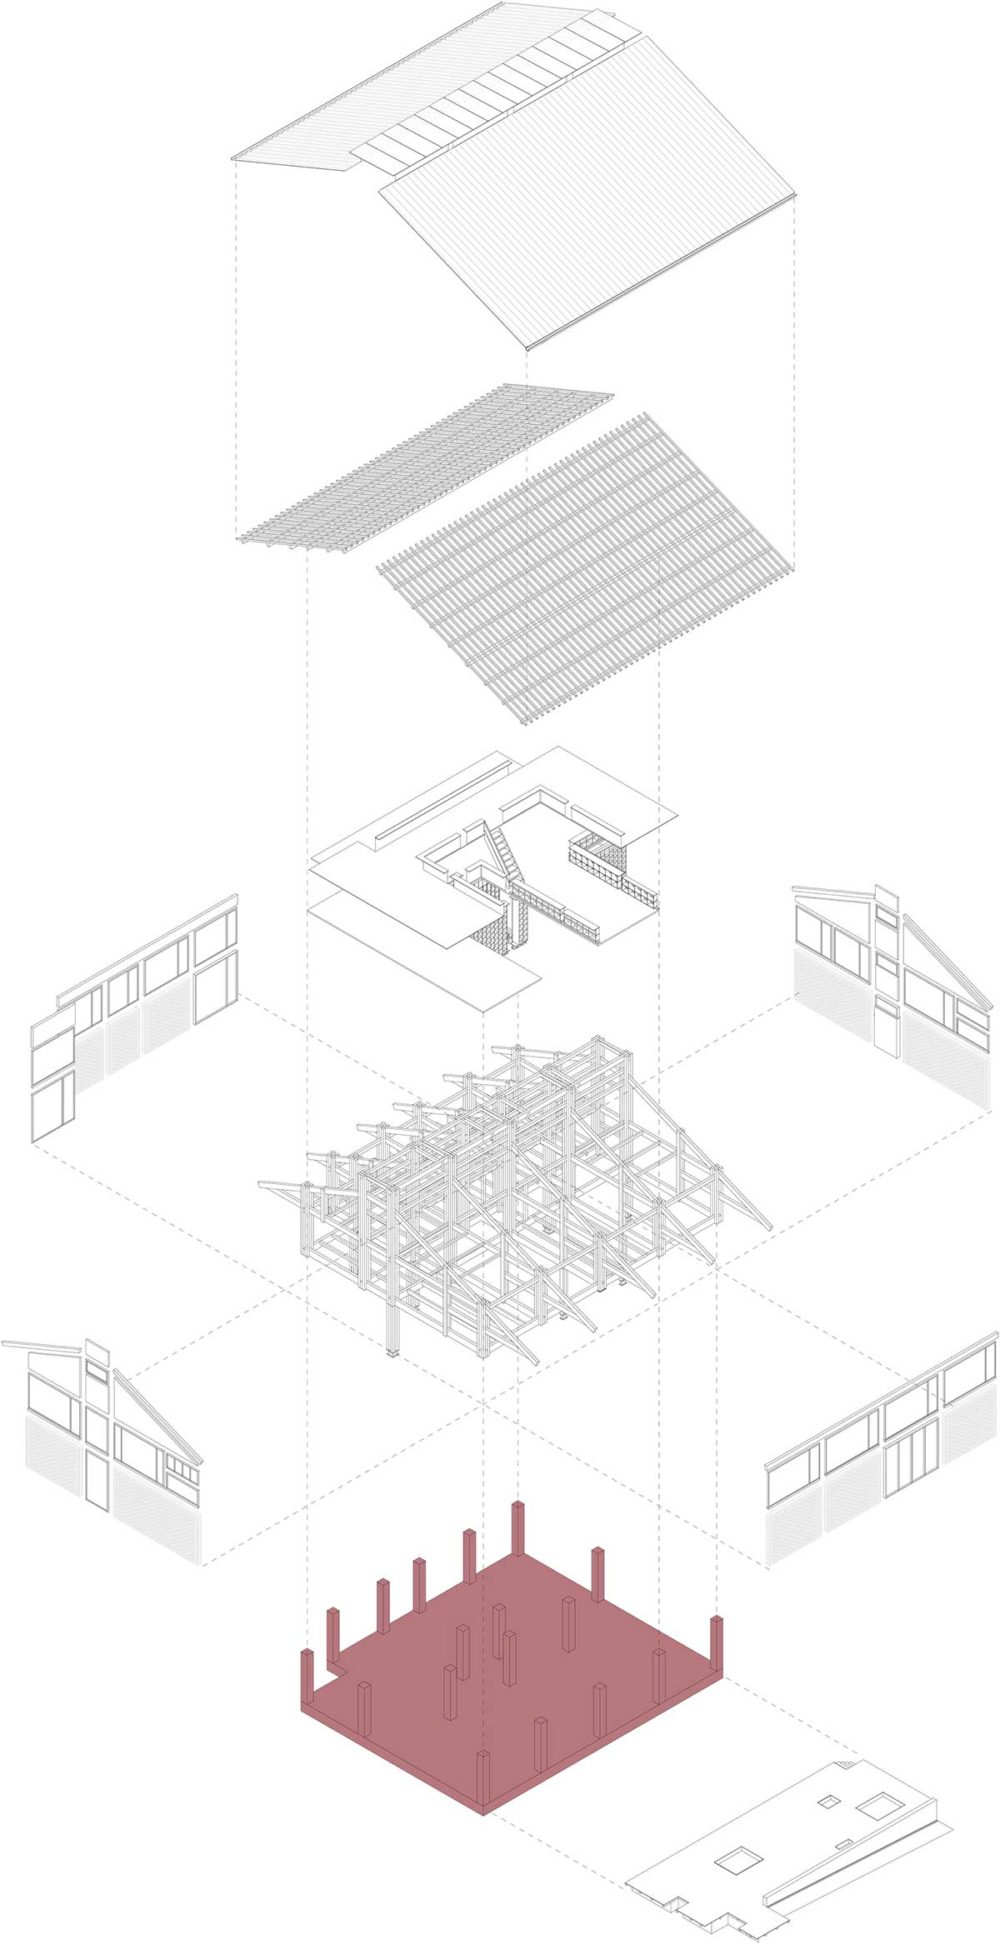 Exploded diagram - Party and Public Service Center of Yuanheguan Village / LUO Studio